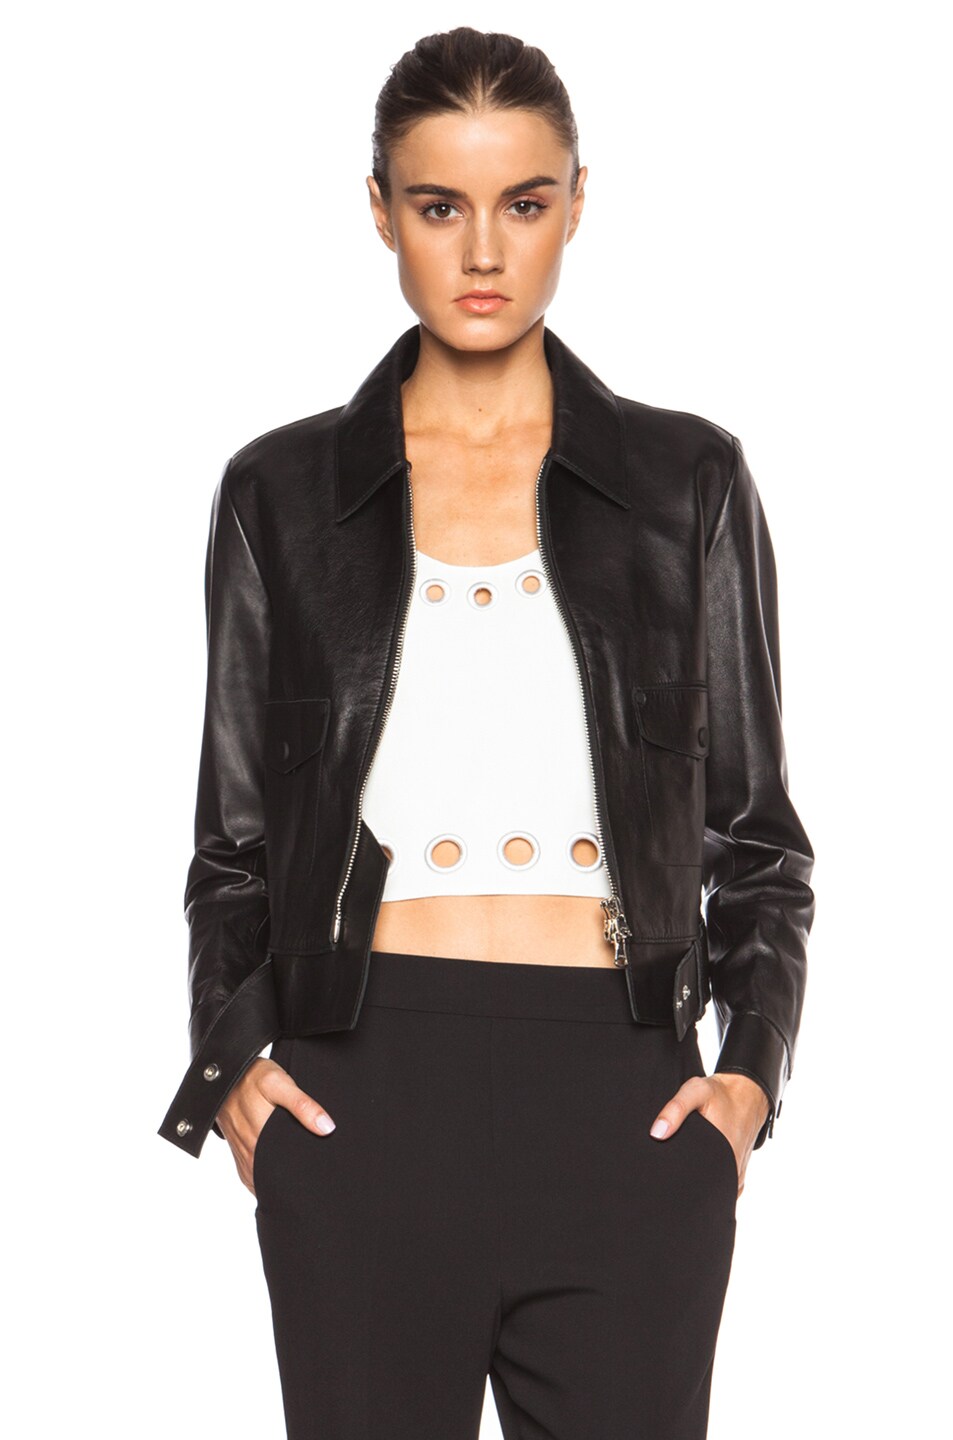 Image 1 of 3.1 phillip lim Boxy Leather Jacket with Topstitched Details and Self Belt in Black